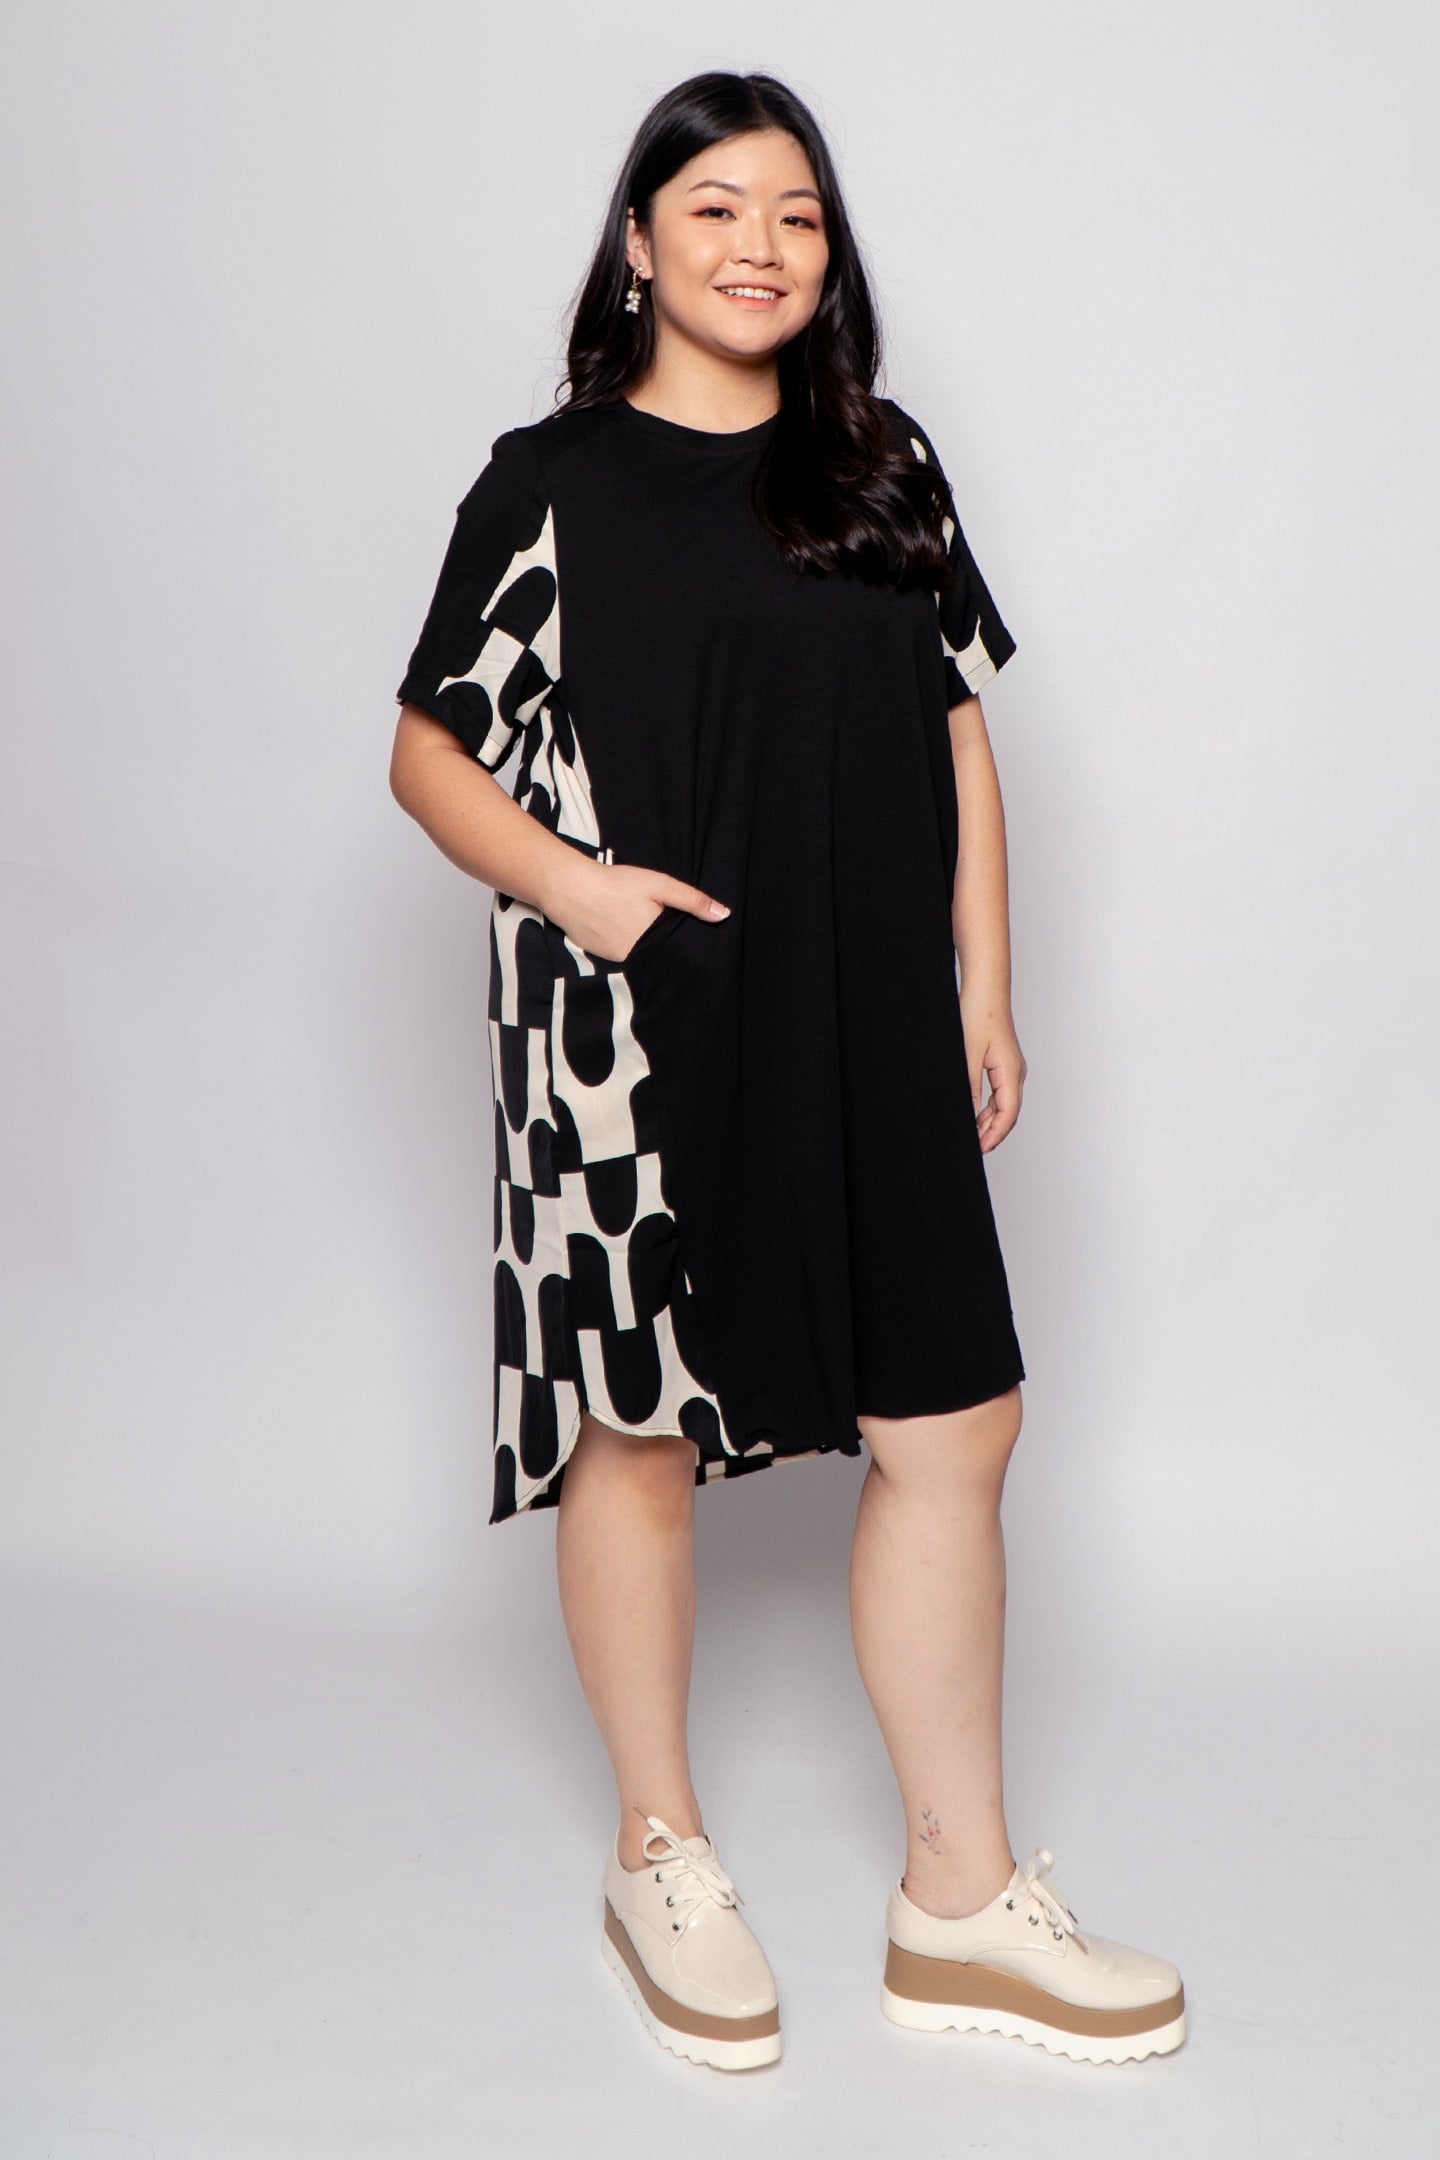 Lee Abstract Dress in Black